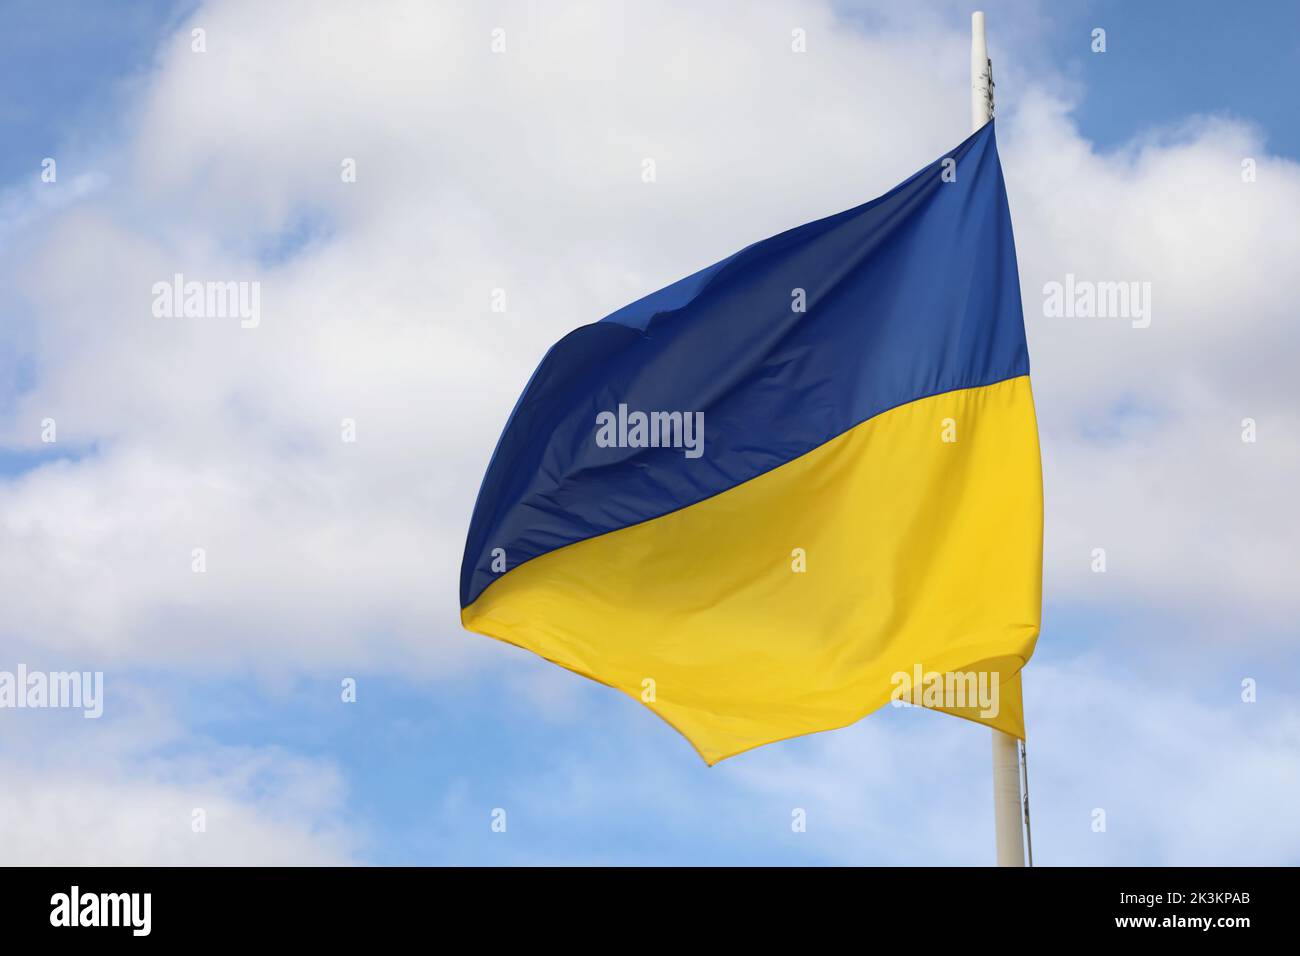 big ukrainian flag on blue sky with blue and yellows colors Stock Photo